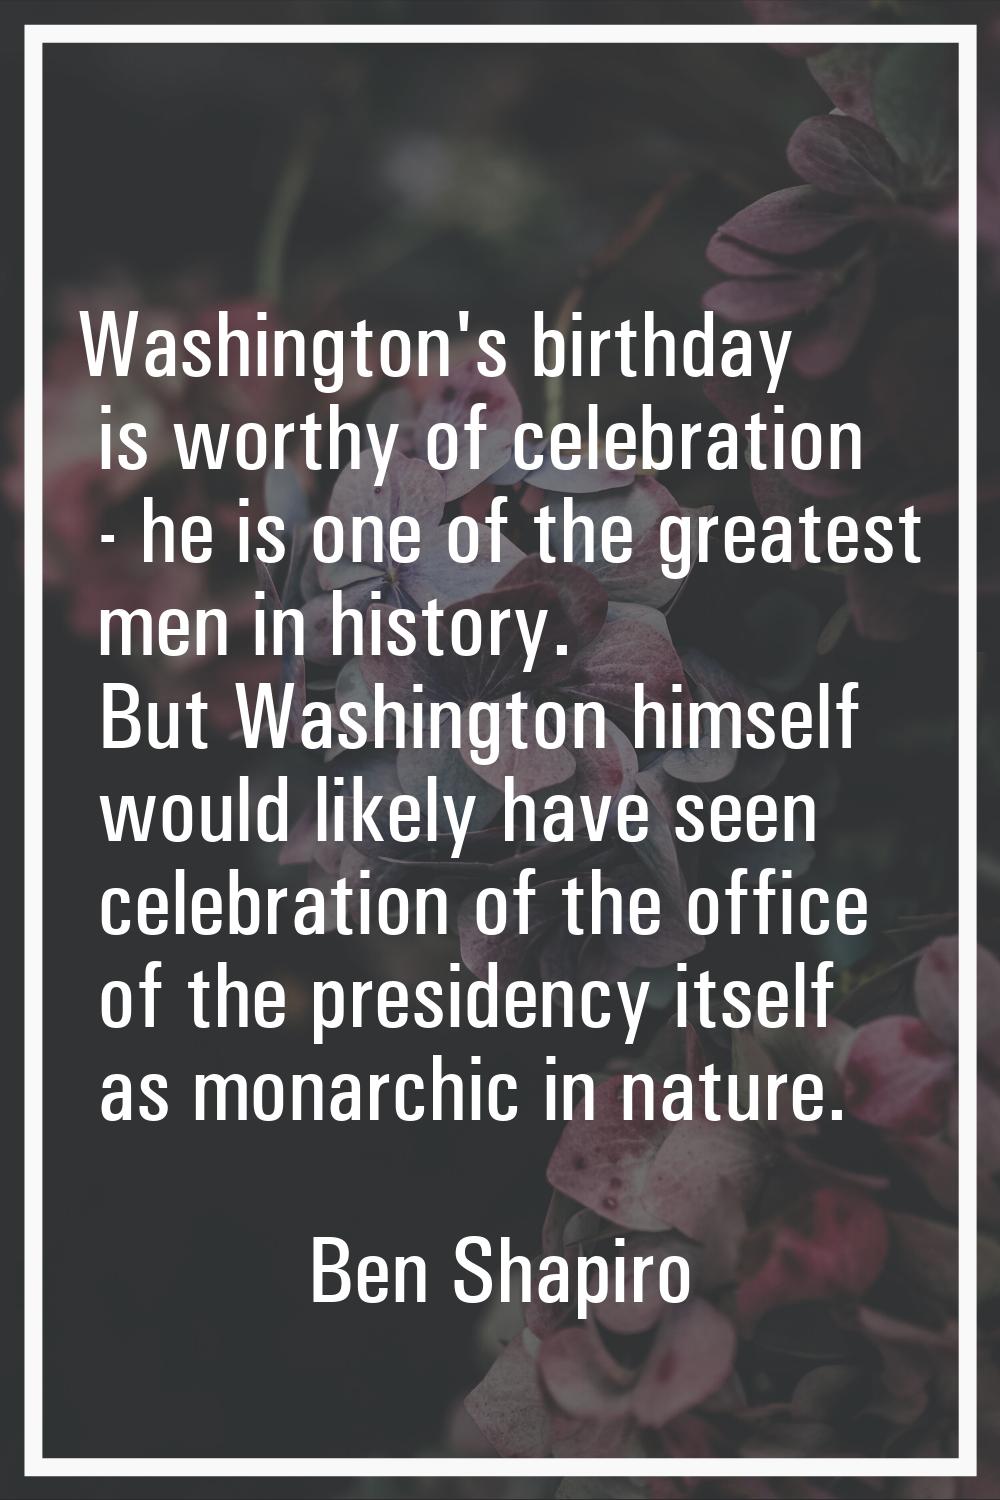 Washington's birthday is worthy of celebration - he is one of the greatest men in history. But Wash